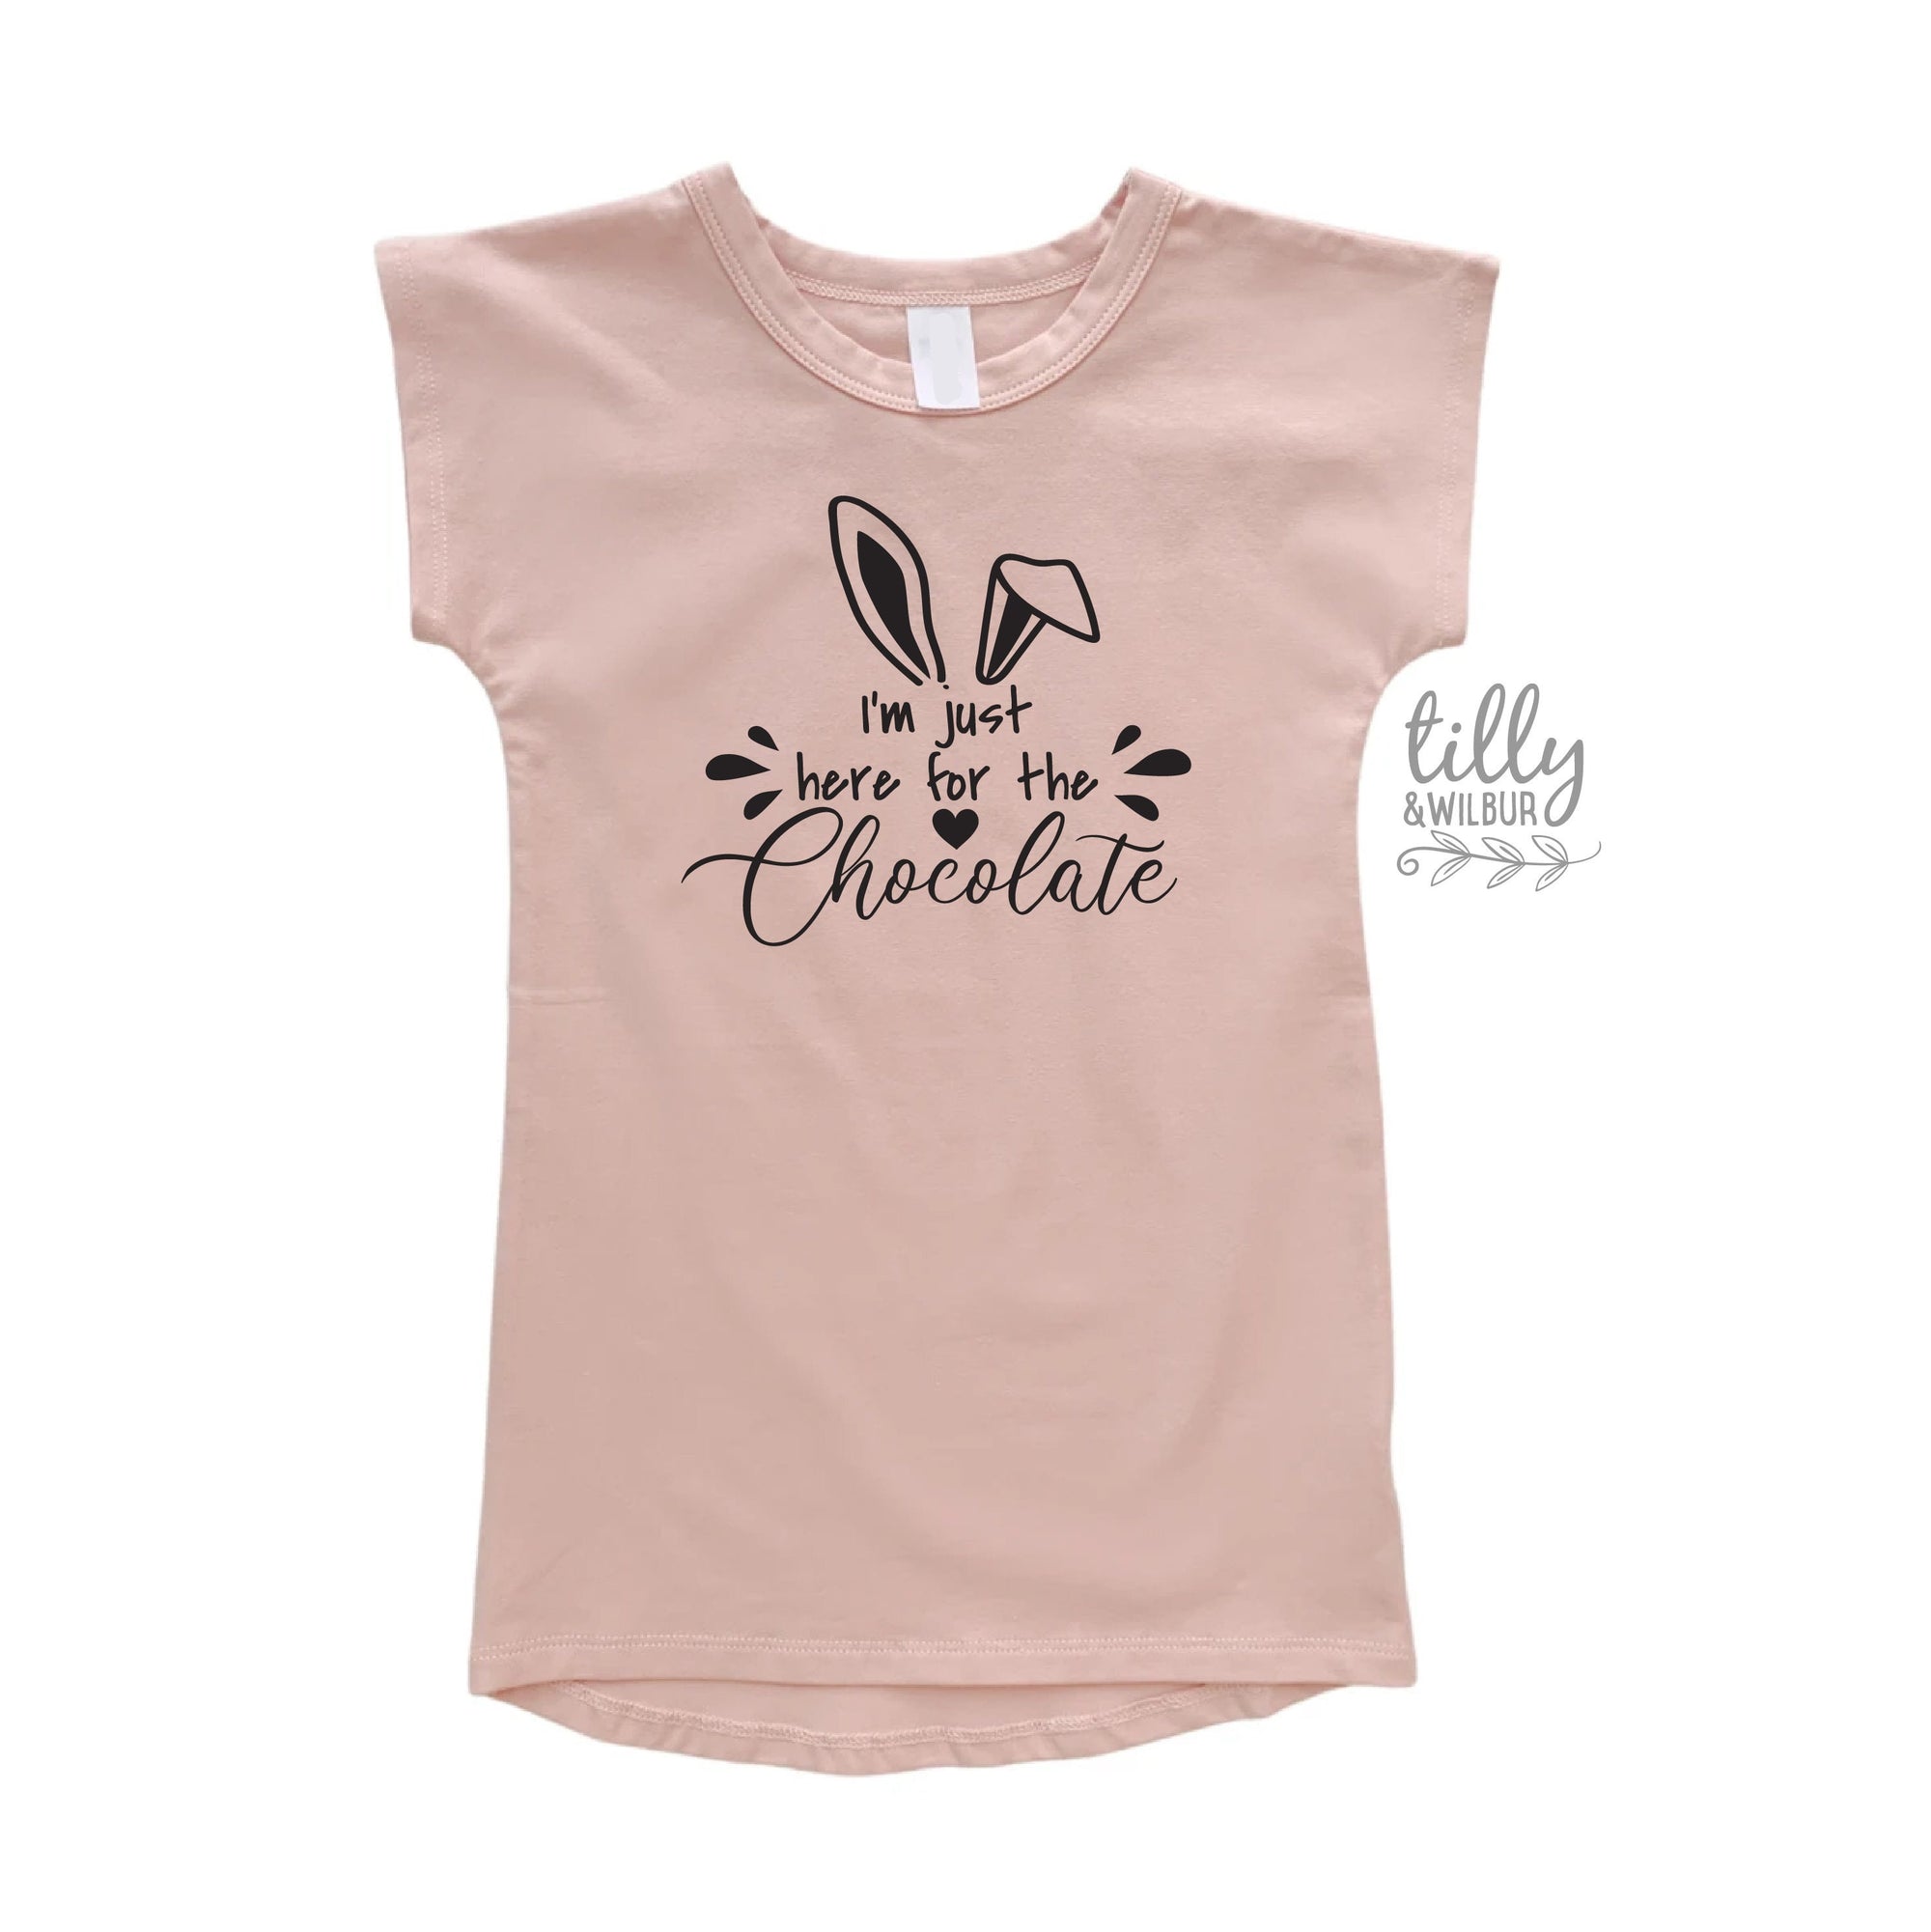 Easter T-Shirt Dress, I'm Just Here For The Chocolate T-Shirt, Easter Egg Hunt T-Shirt, Funny Easter Gift, Chocolate Lover Easter T-Shirt